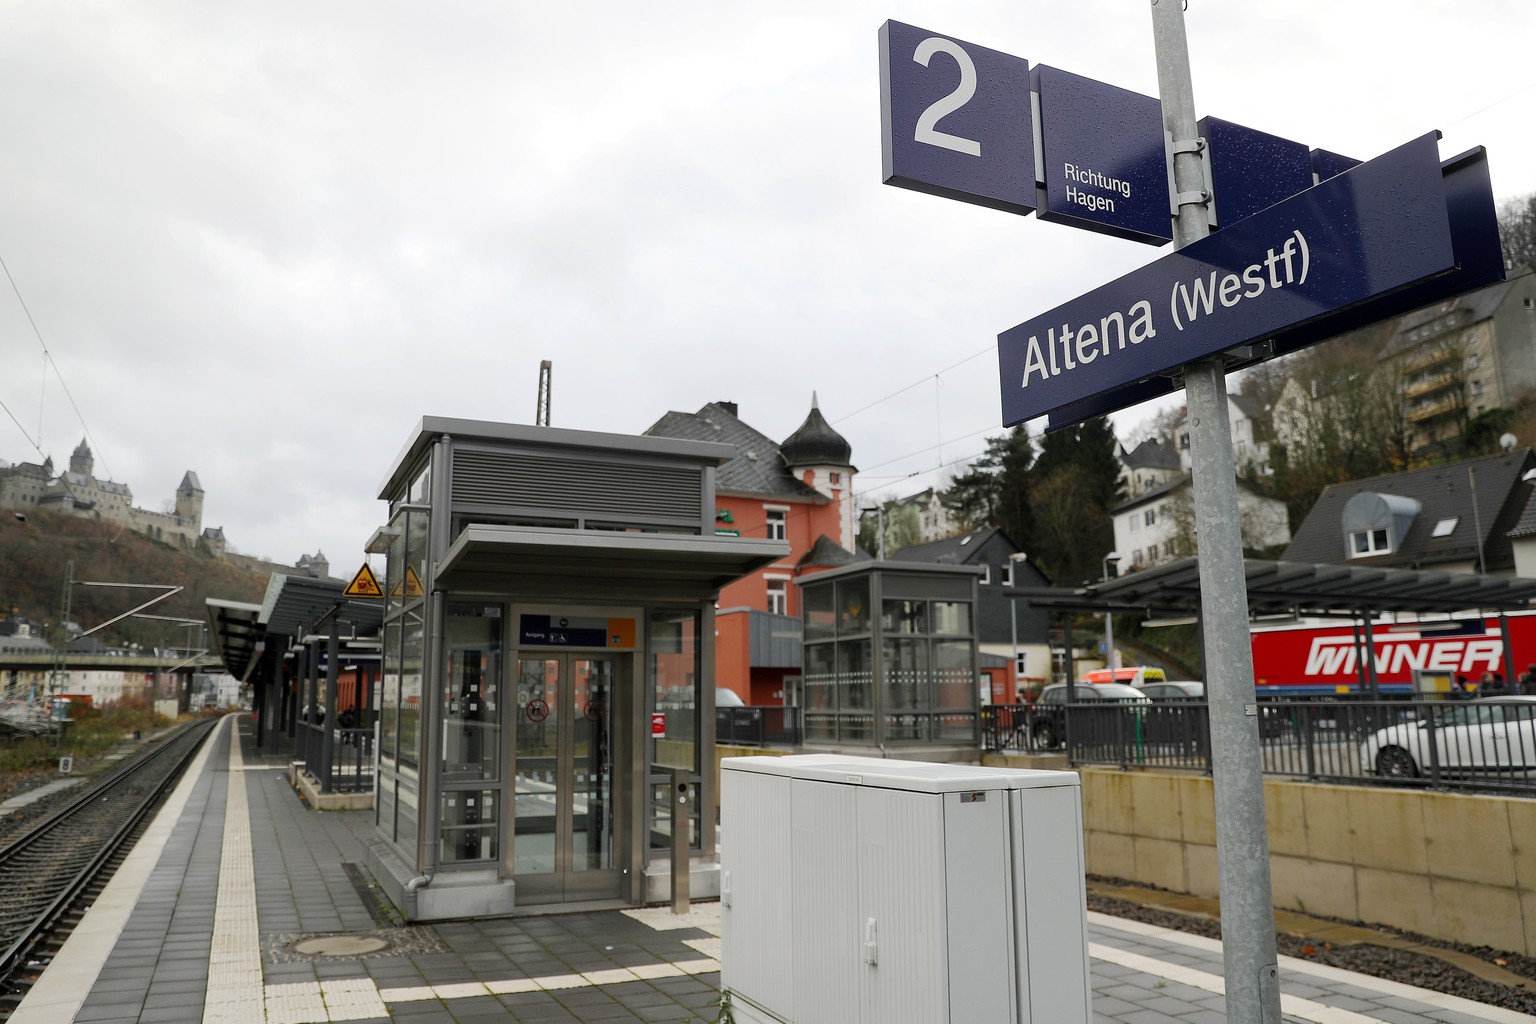 epa06355285 The train station of Altena, North Rhine-Westphalia, Germany, 28 November 2017. A man has attacked and injured the mayor of Altena in what police believe was a xenophobic act. Andreas Holl ...